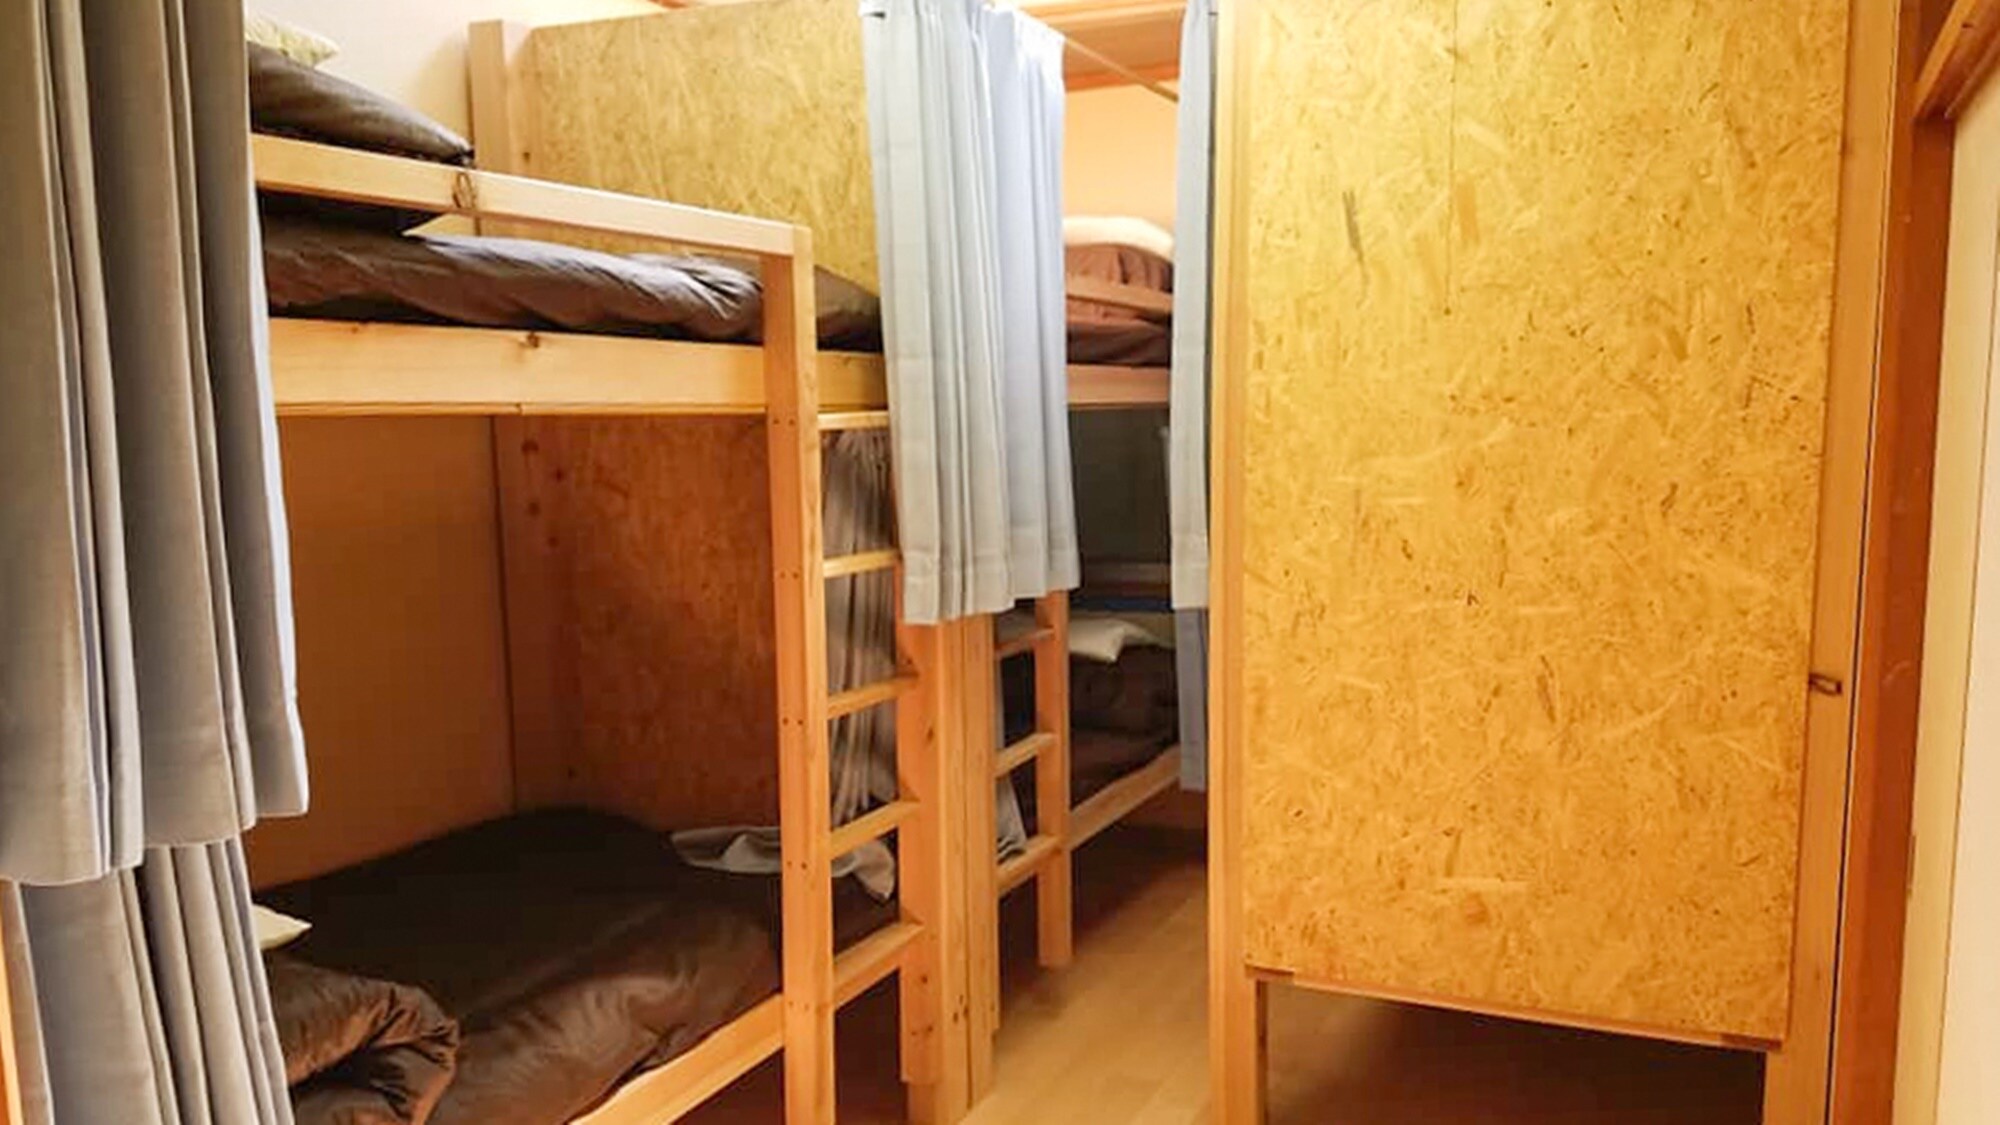 * Female-only dormitory / Partitions and curtains ensure privacy